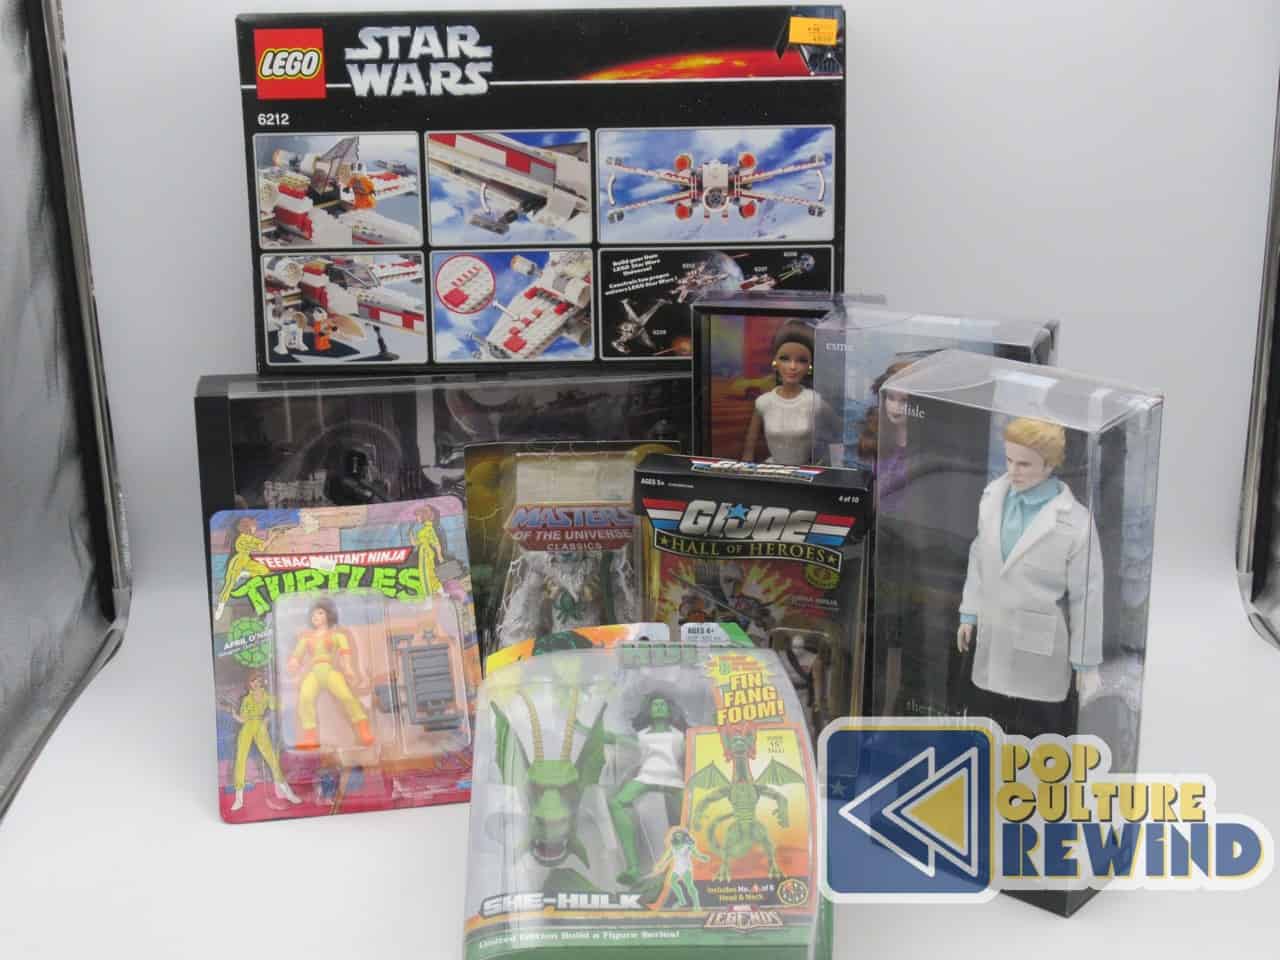 Toys Coming to Auction March 11